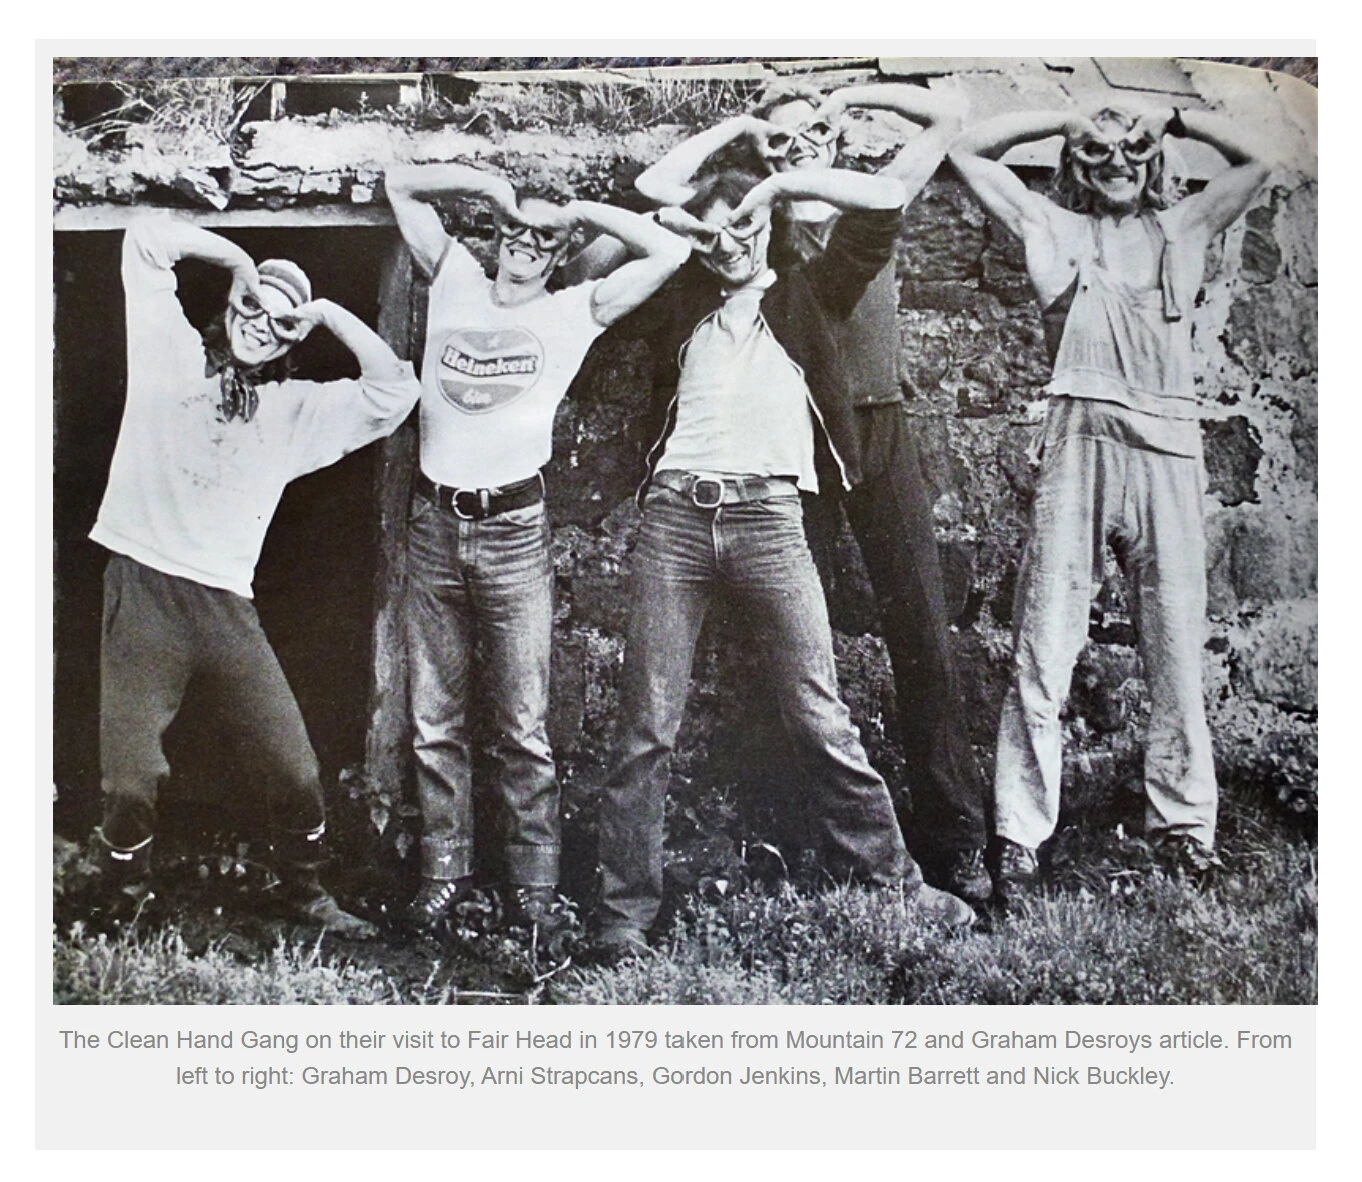 The Clean Hand Gang on their visit to Fair Head in 1979 taken from Mountain 72 and Graham Desroy's article. From left to right: Graham Desroy, Arni Strapcans, Gordon Jenkins, Martin Barrett and Nick Buckley.